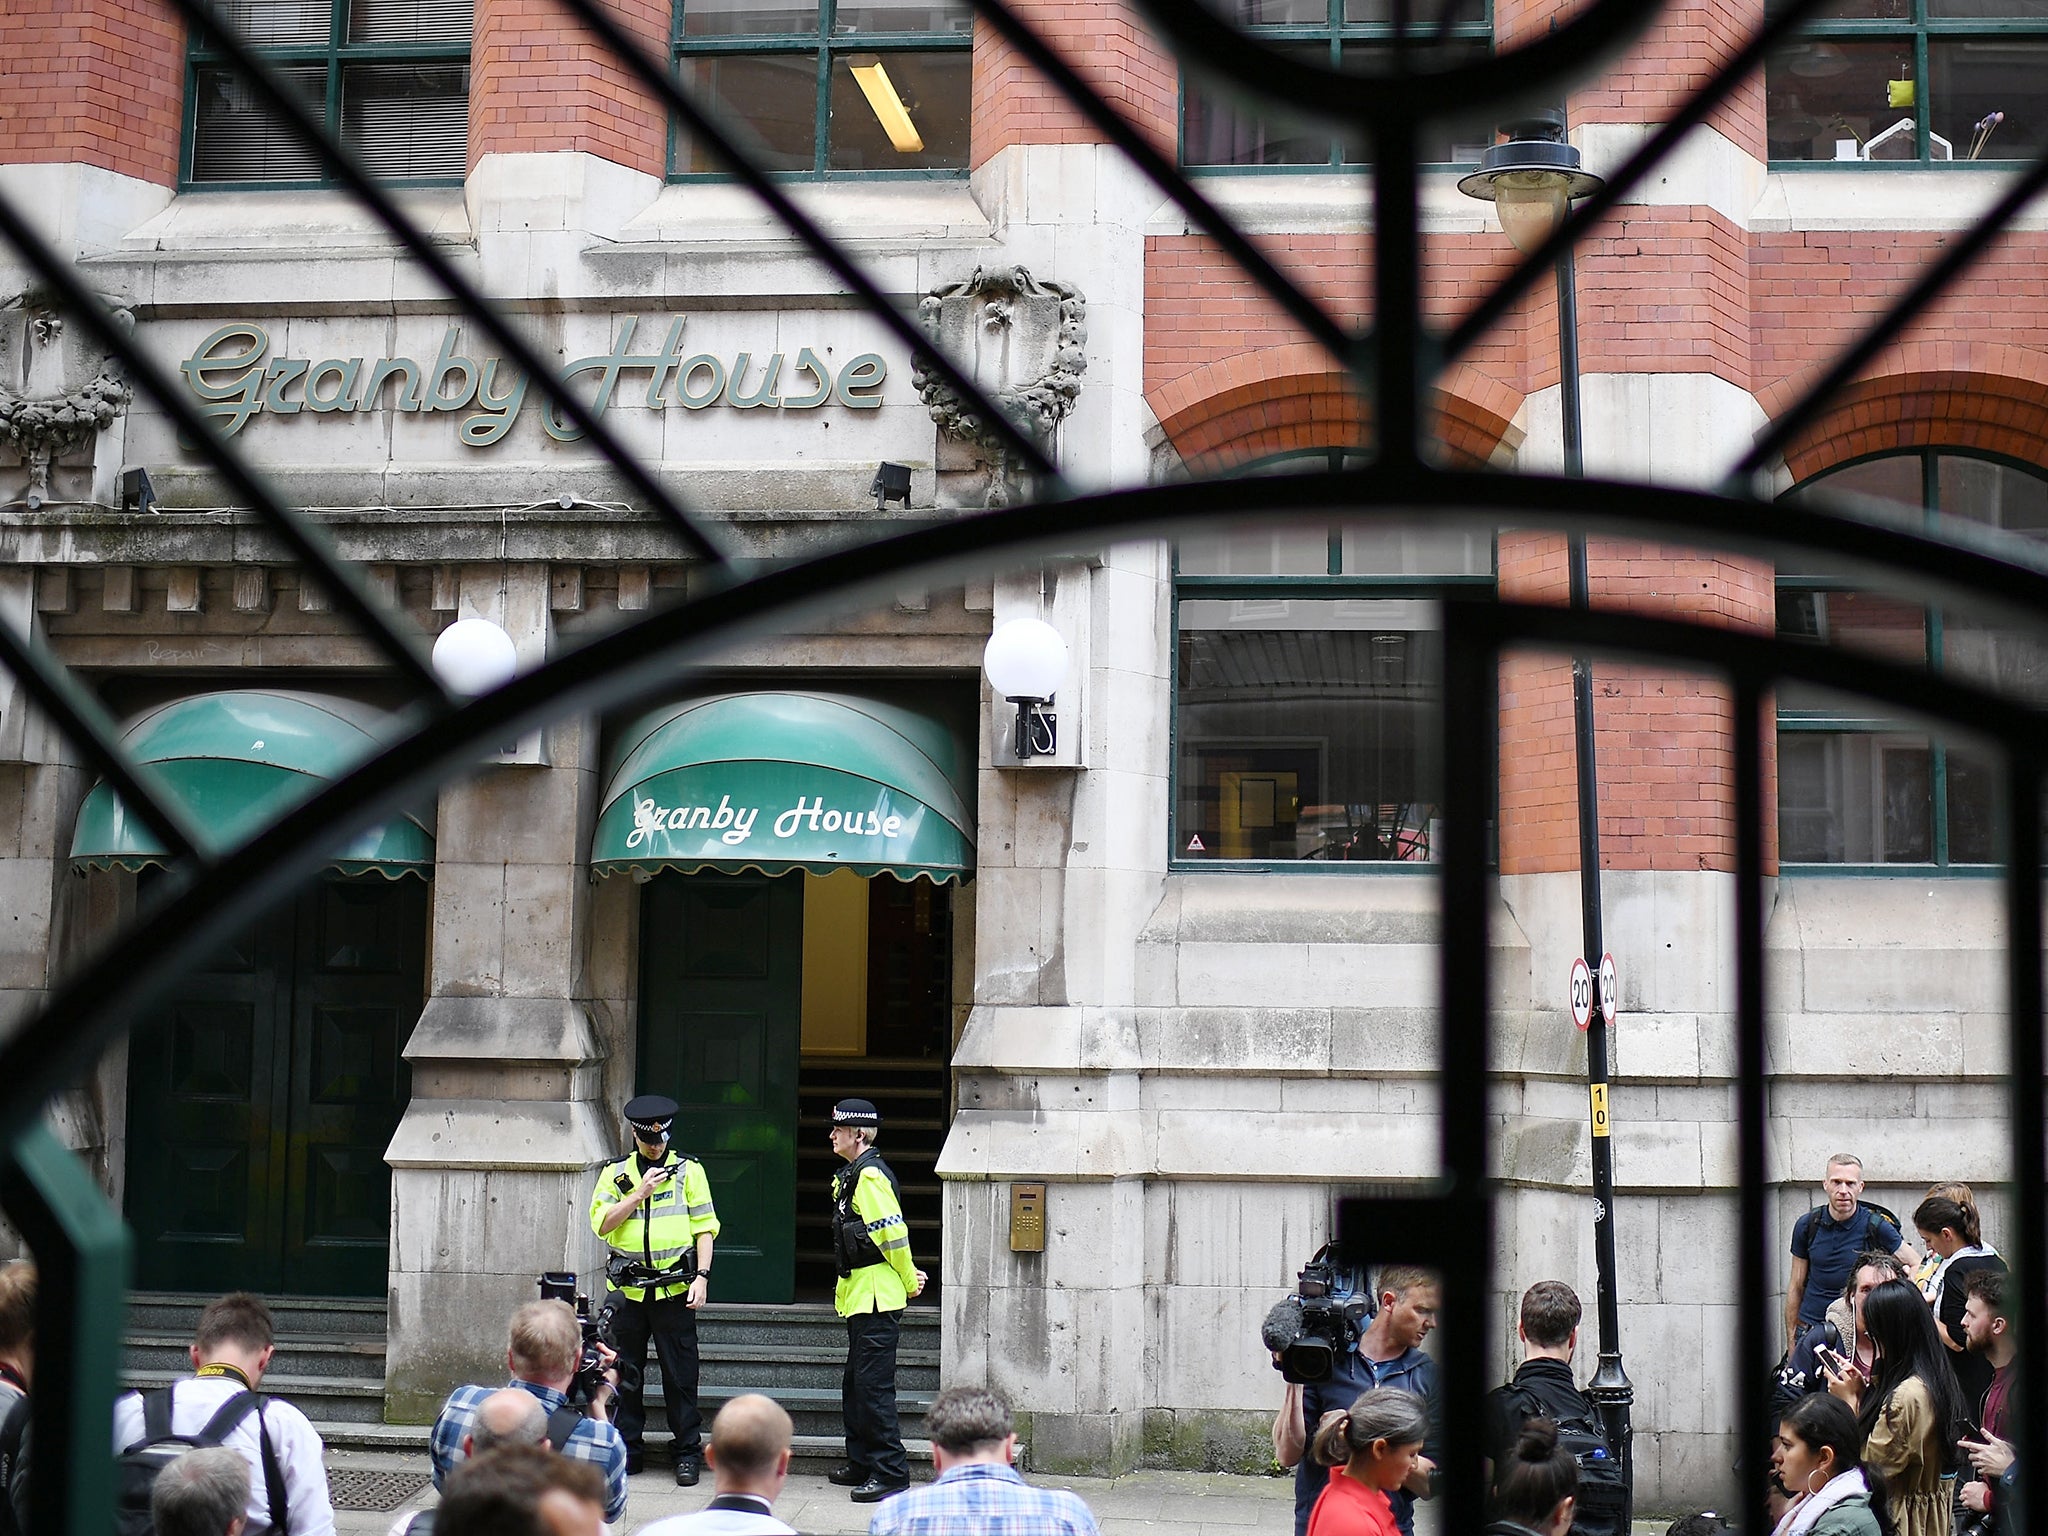 Police guard the entrance to Granby House in the city centre following an armed raid, in Manchester, England